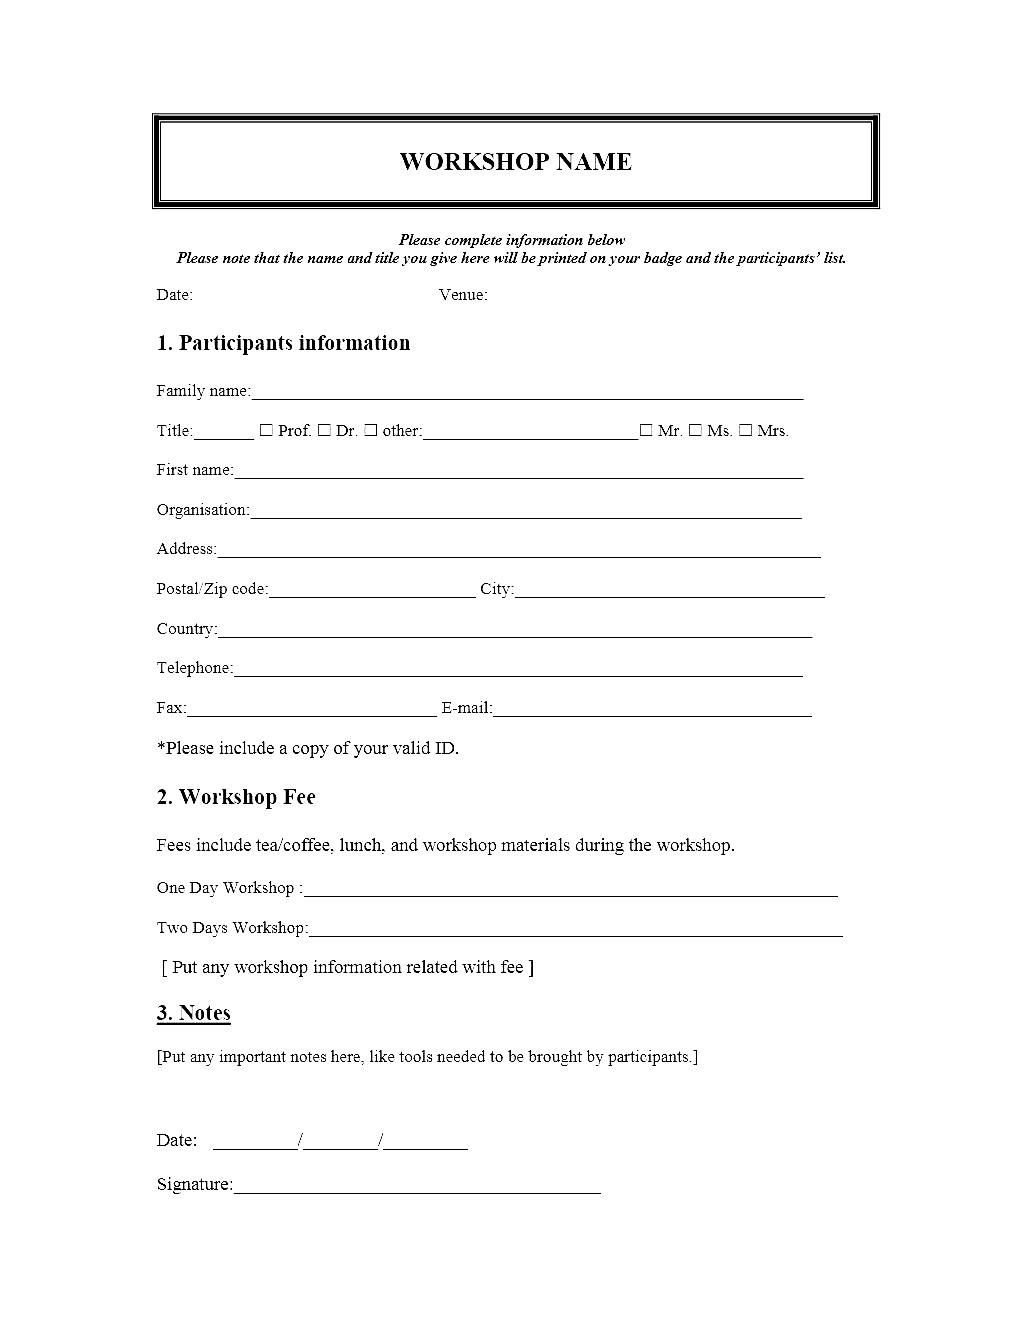 Registration forms Template Free event Registration form Template Microsoft Word